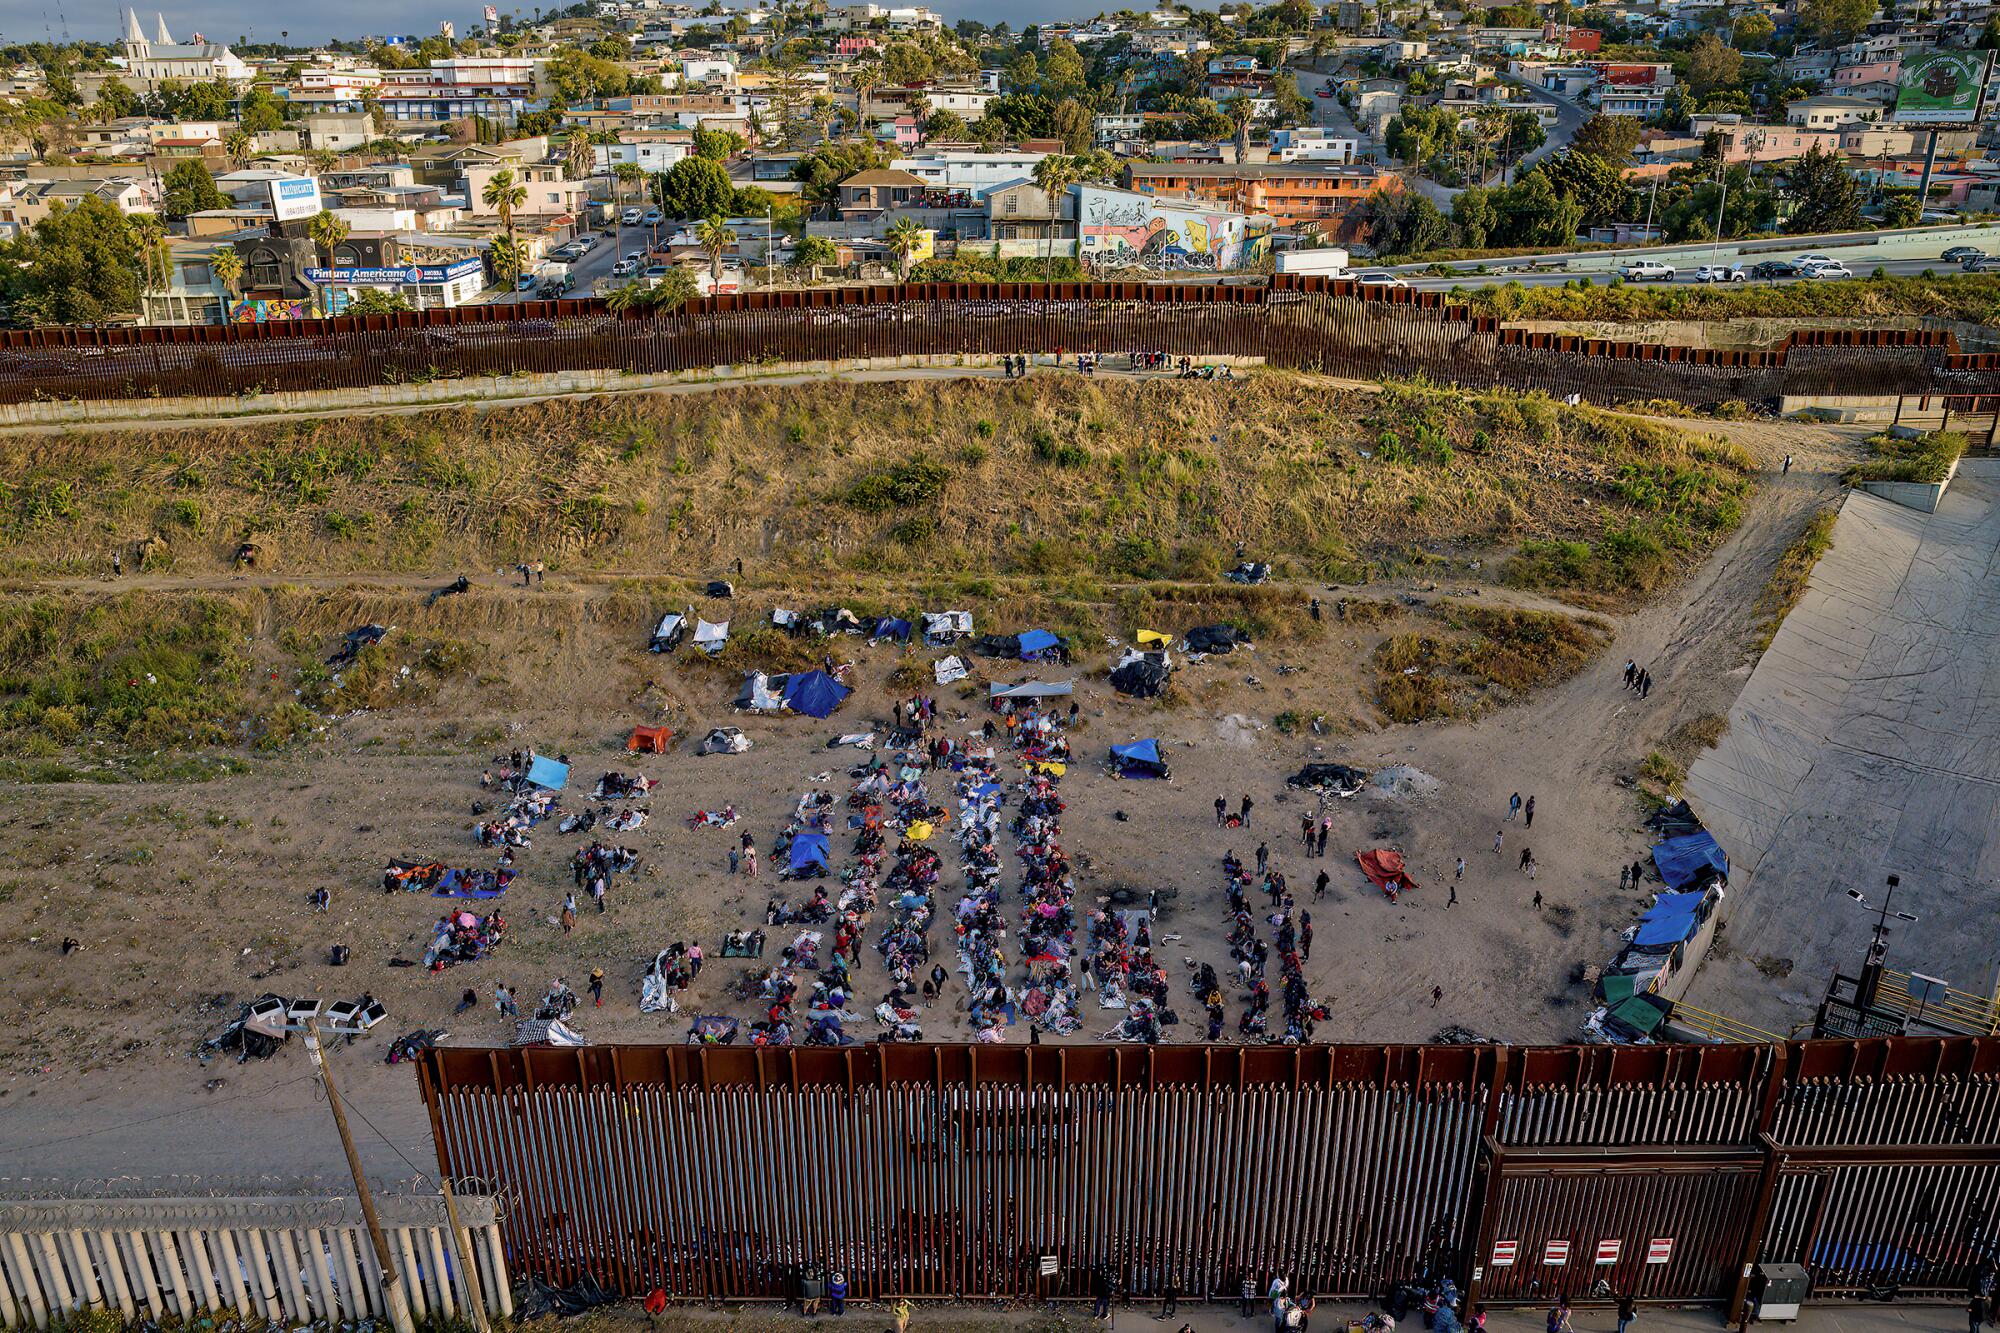 More than 200 migrants wait at the border fence for the end of Title 42 in San Diego on Thursday.